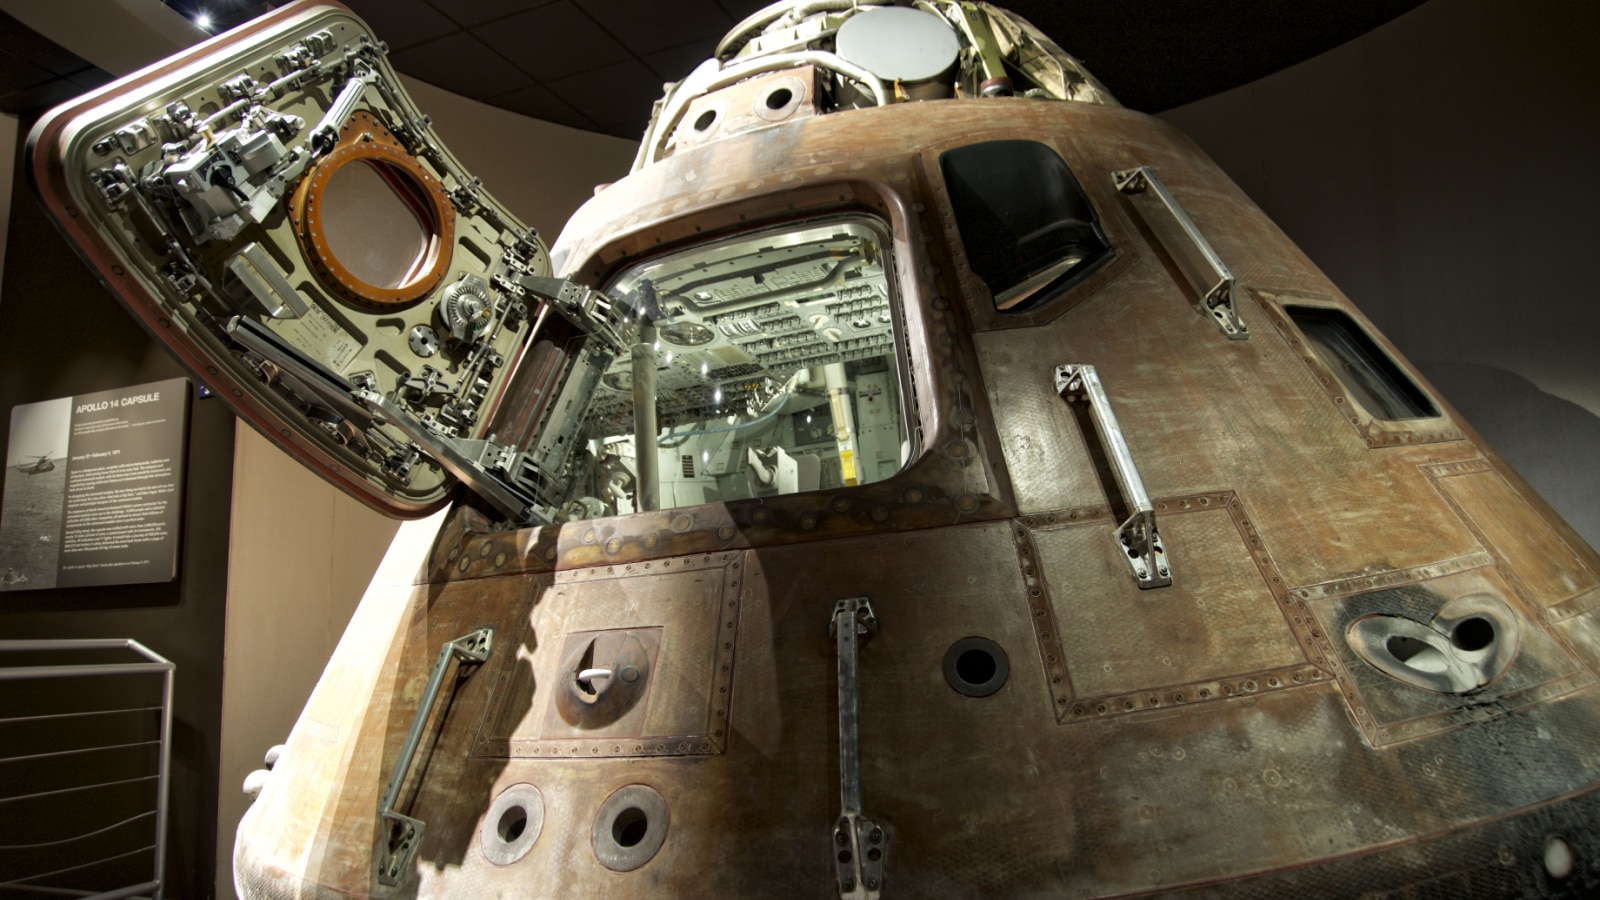 CAPE CANAVERAL, FLORIDA DECEMBER 5, 2014: Apollo 13 LEM capsule displayed at NASA, Kennedy Space Center in Florida. Apollo 13 was the third manned mission intended to land on the Moon.